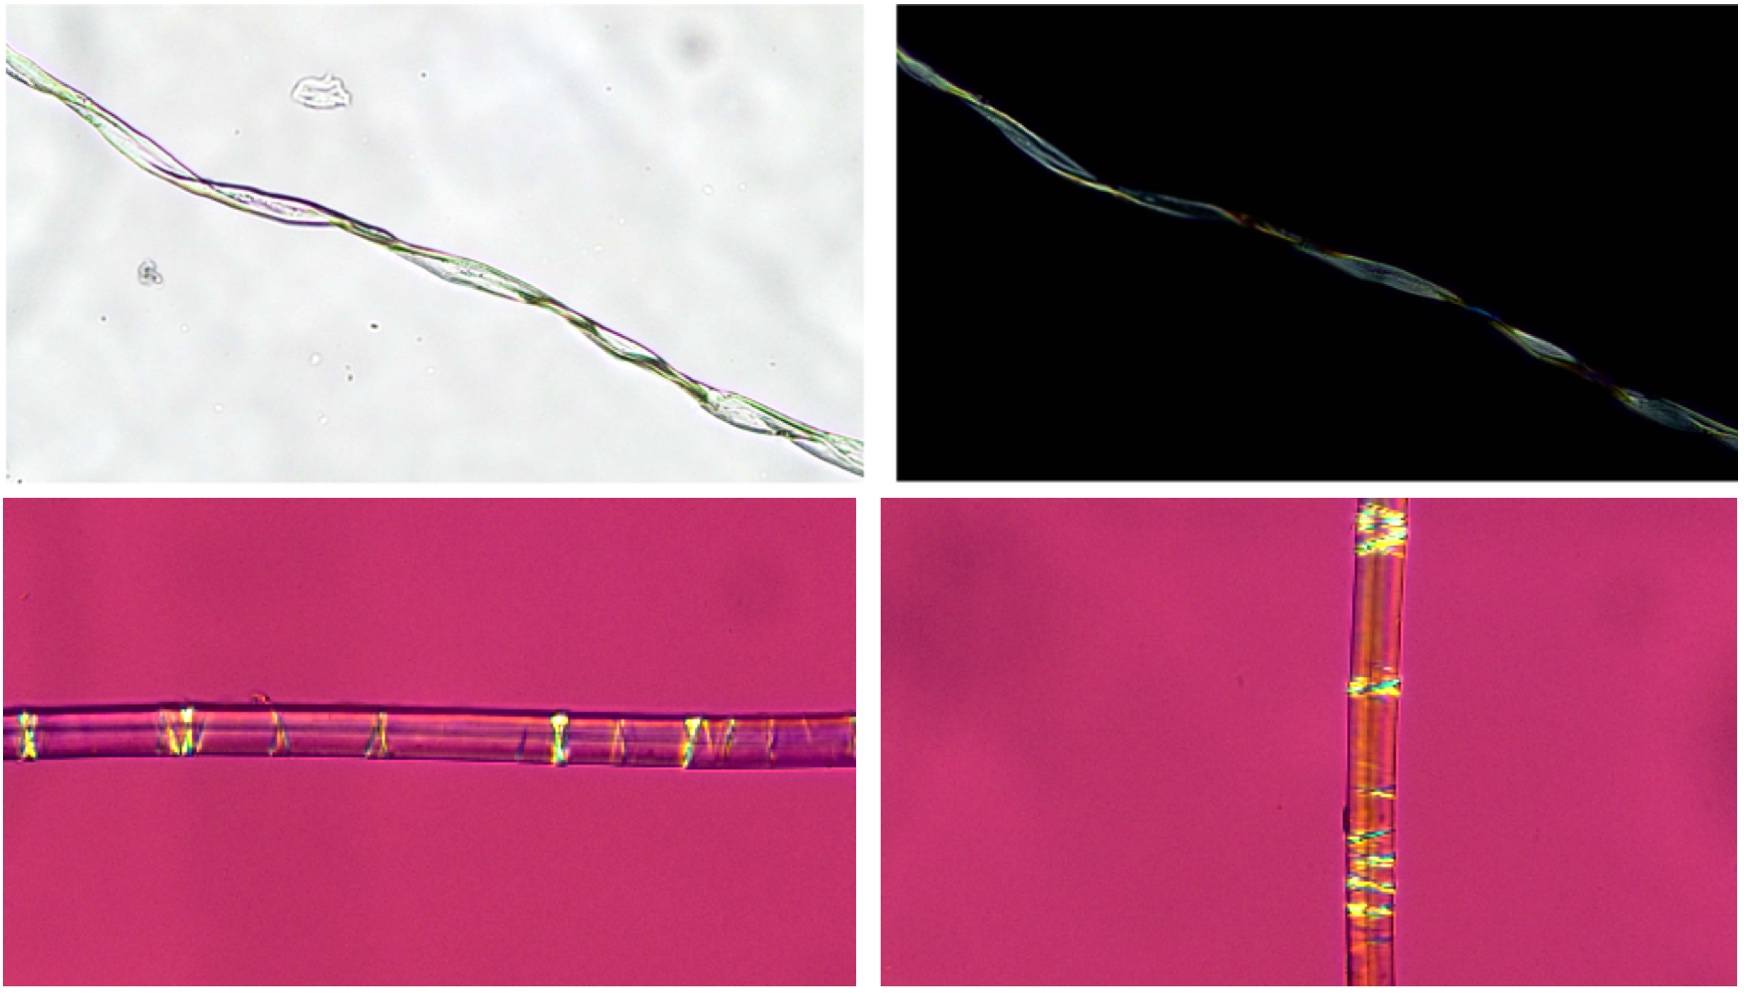 Four images of fibers under a microscope